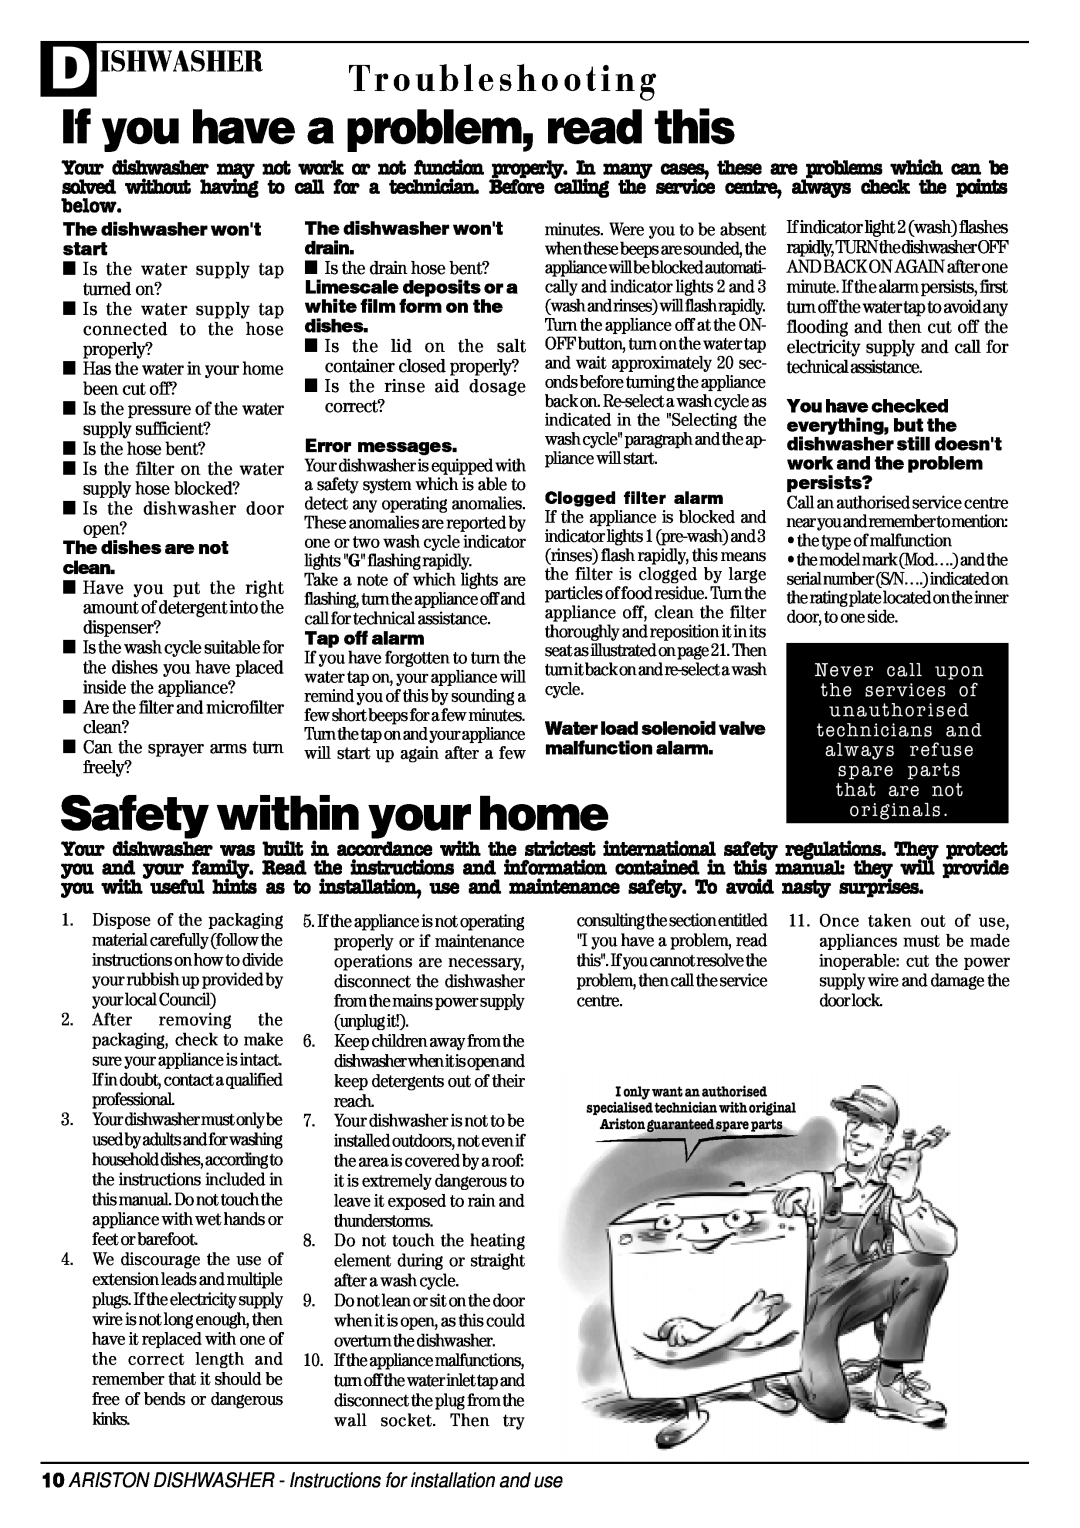 Ariston AFA 370 manual If you have a problem, read this, Safety within your home, Troubleshooting, Ishwasher 